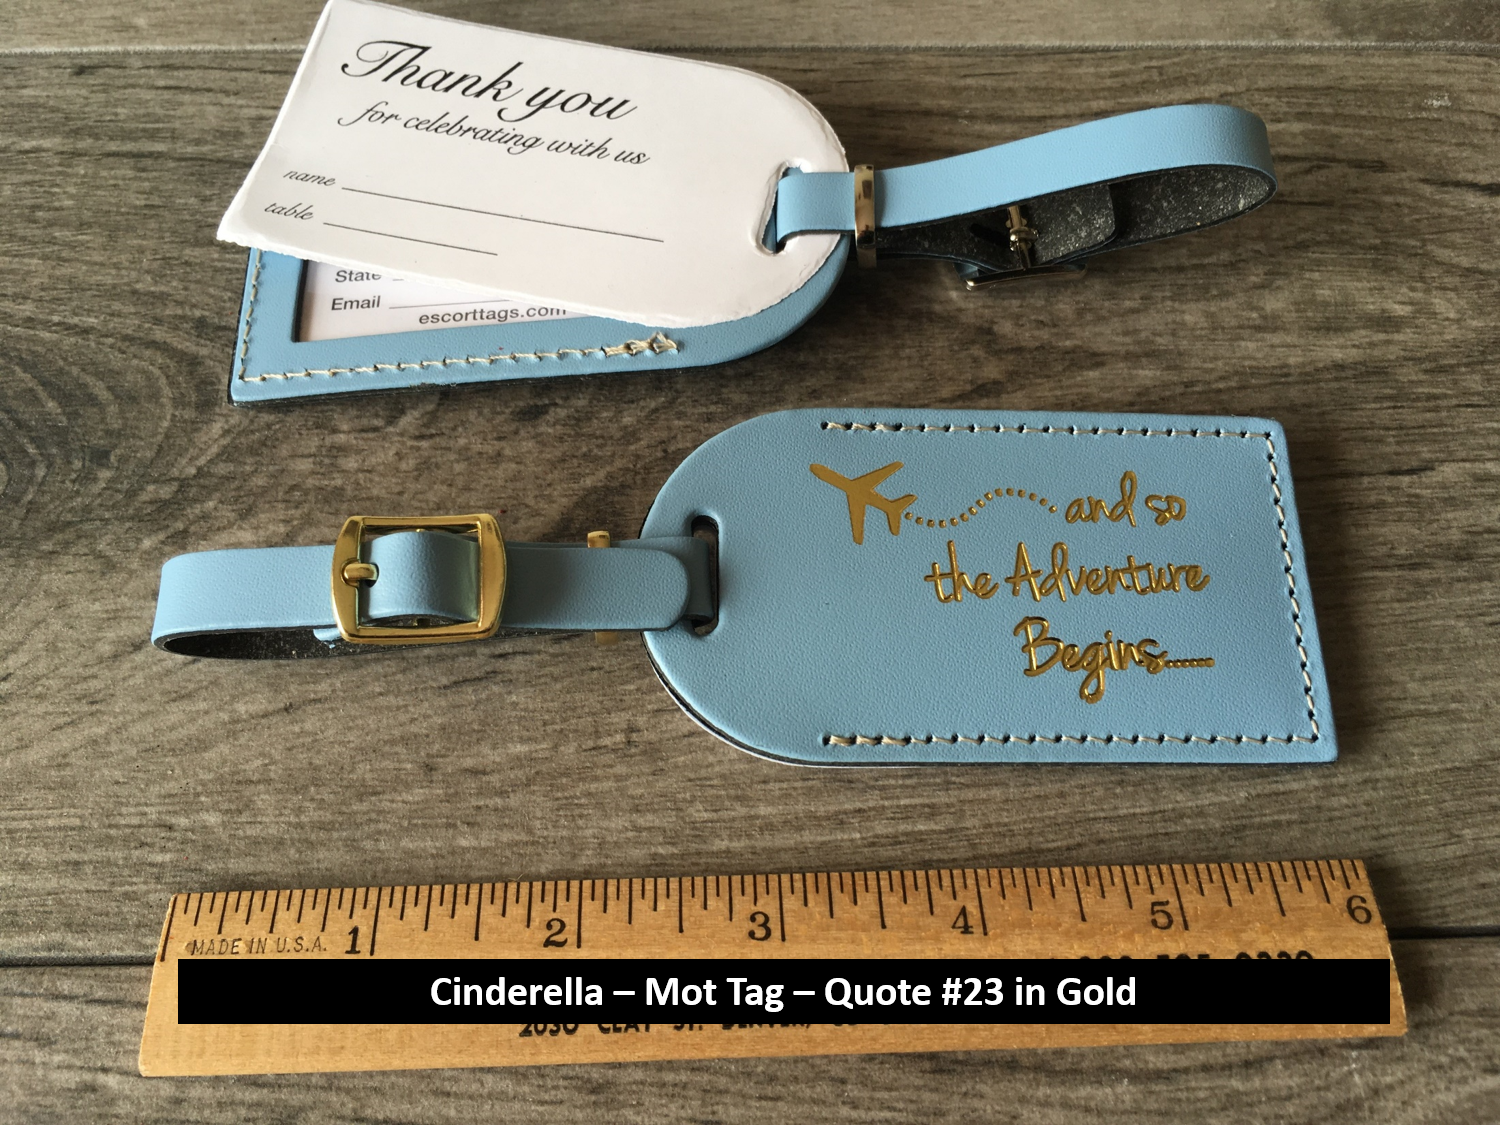 Stylish Name Personalized Teal Bag Tag